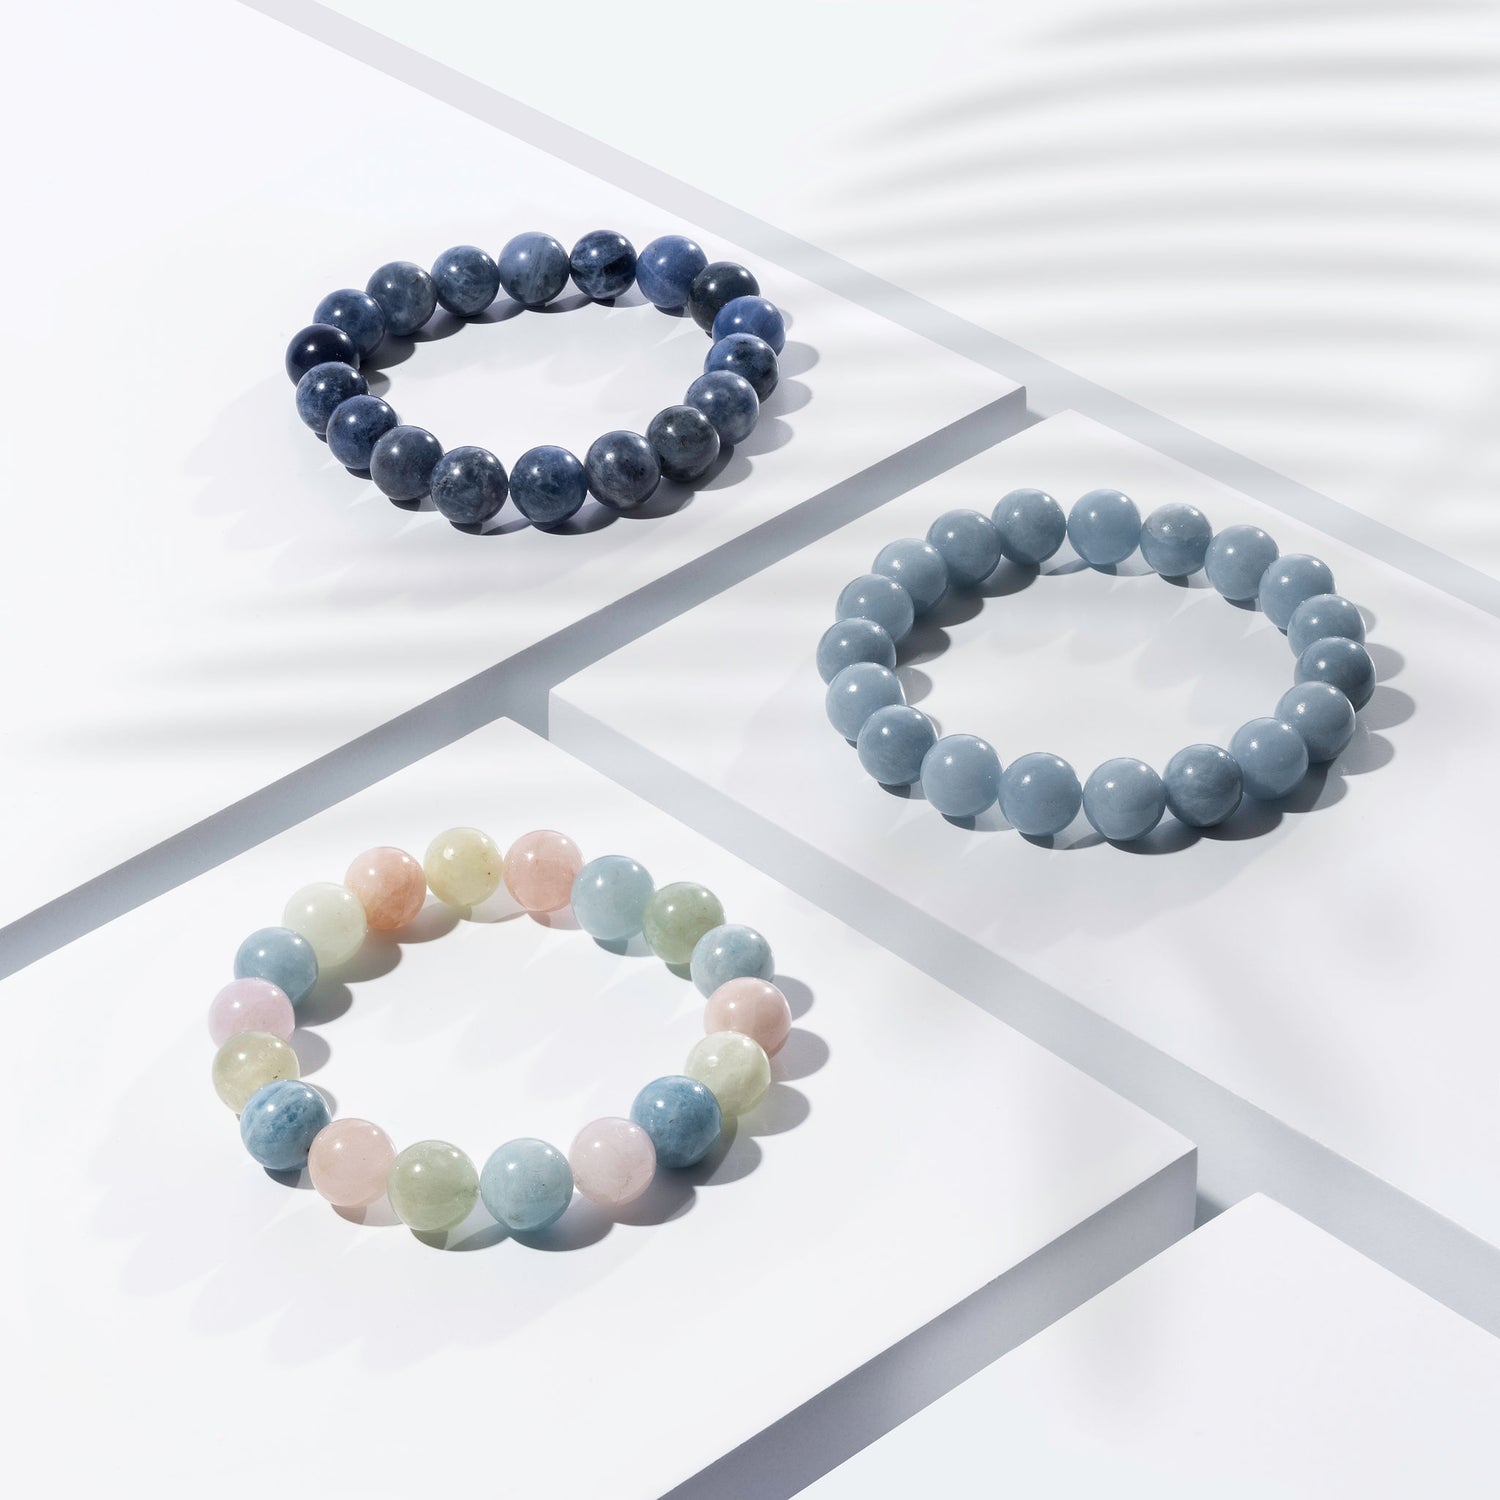 Three blue crystal gemstone bracelets of various shades positioned on white blocks. There is a palm foliage shadow dappling light across the display.